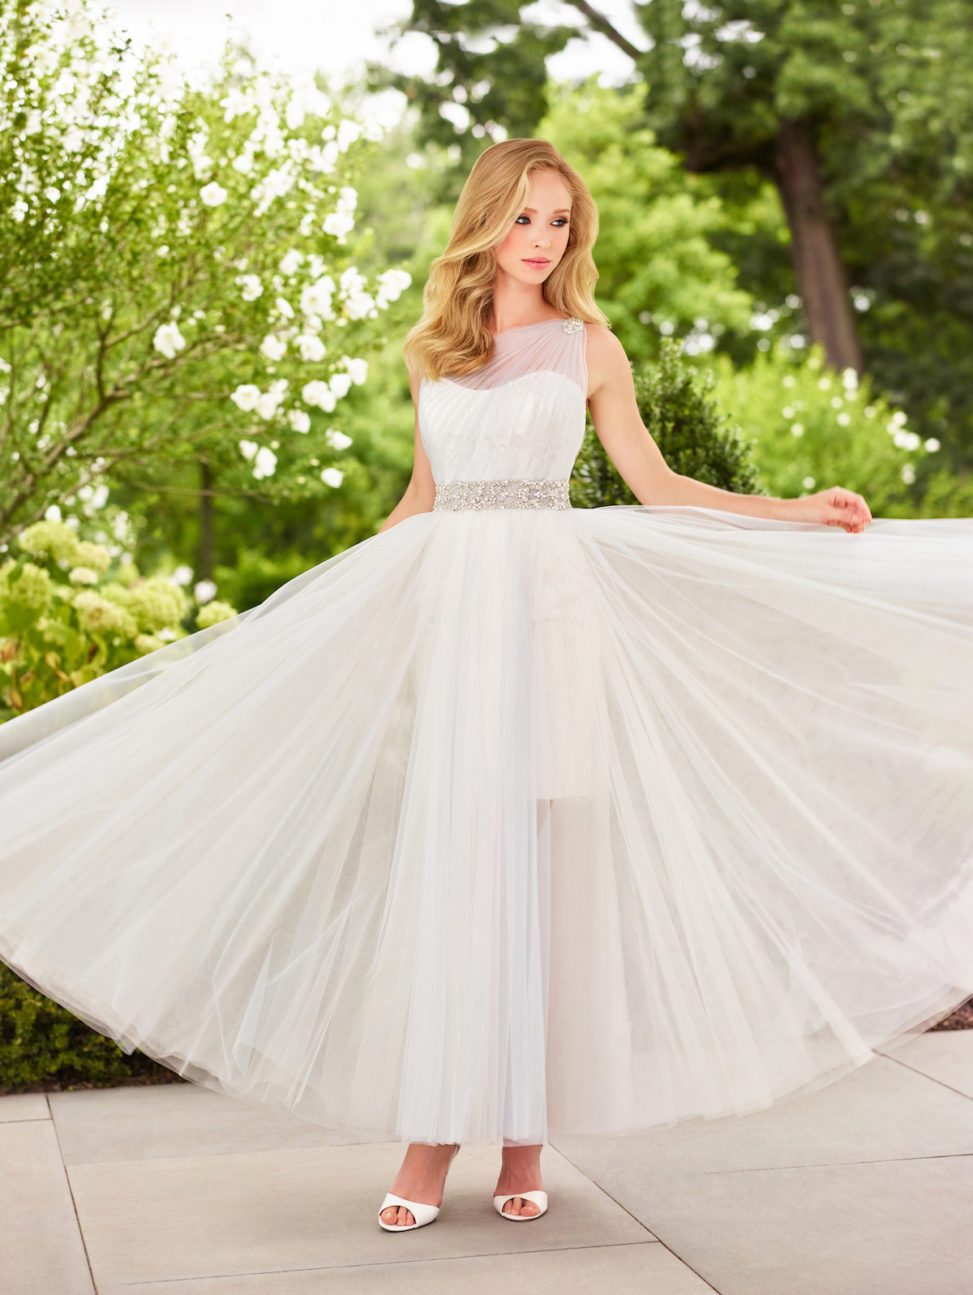 Wedding Dress Enchanting 118147, available in sizes 0-20, 18W-26W